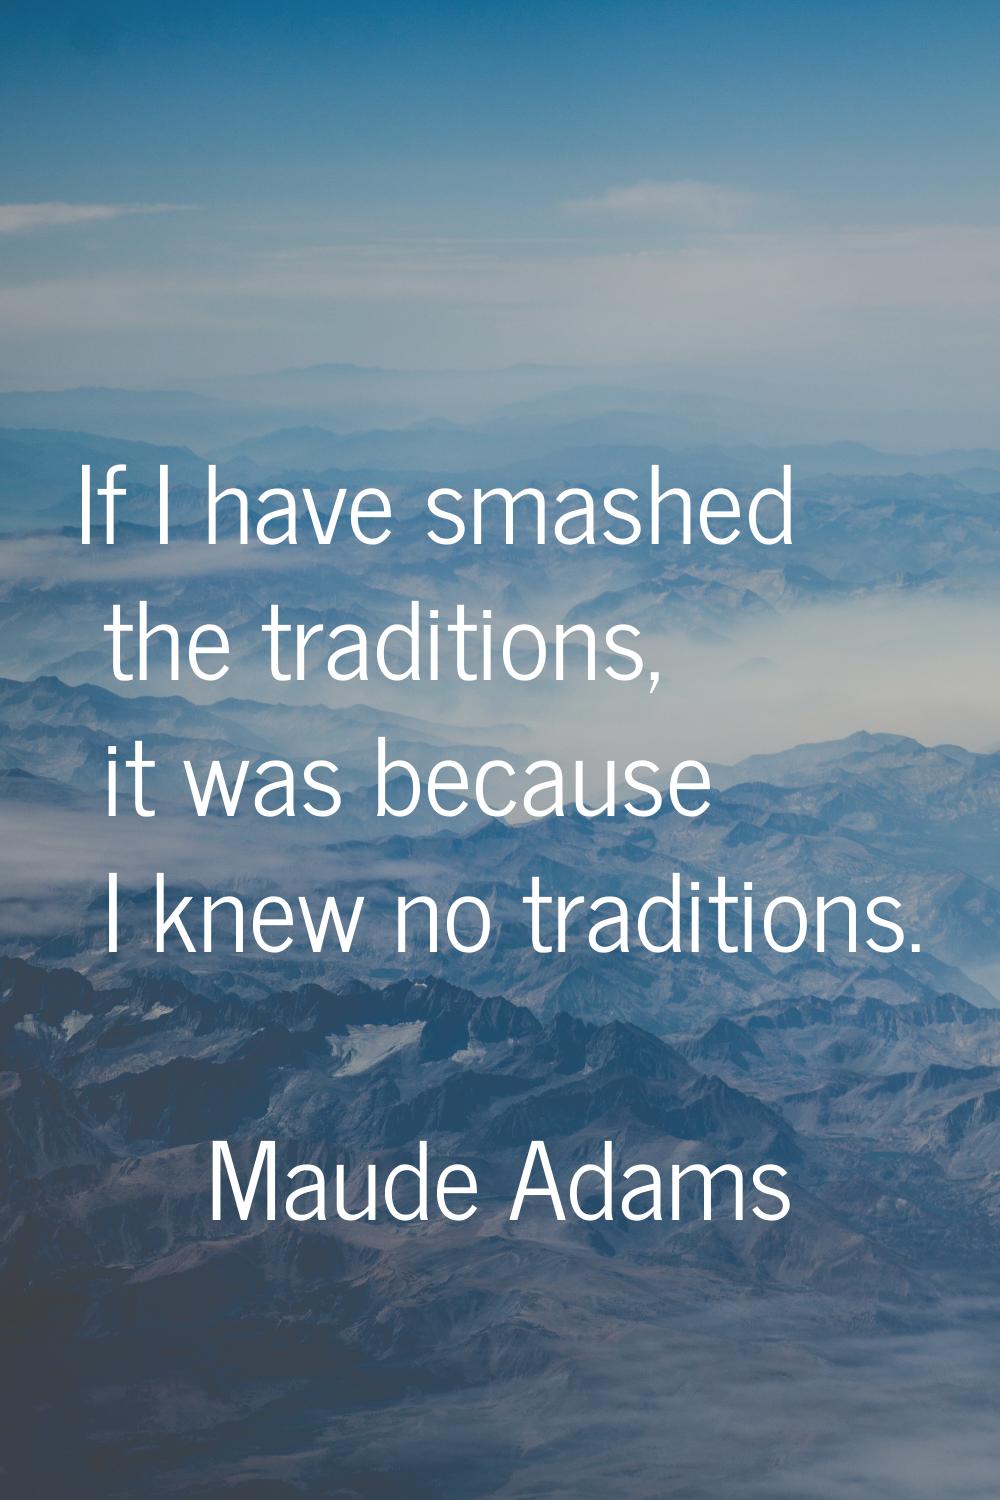 If I have smashed the traditions, it was because I knew no traditions.